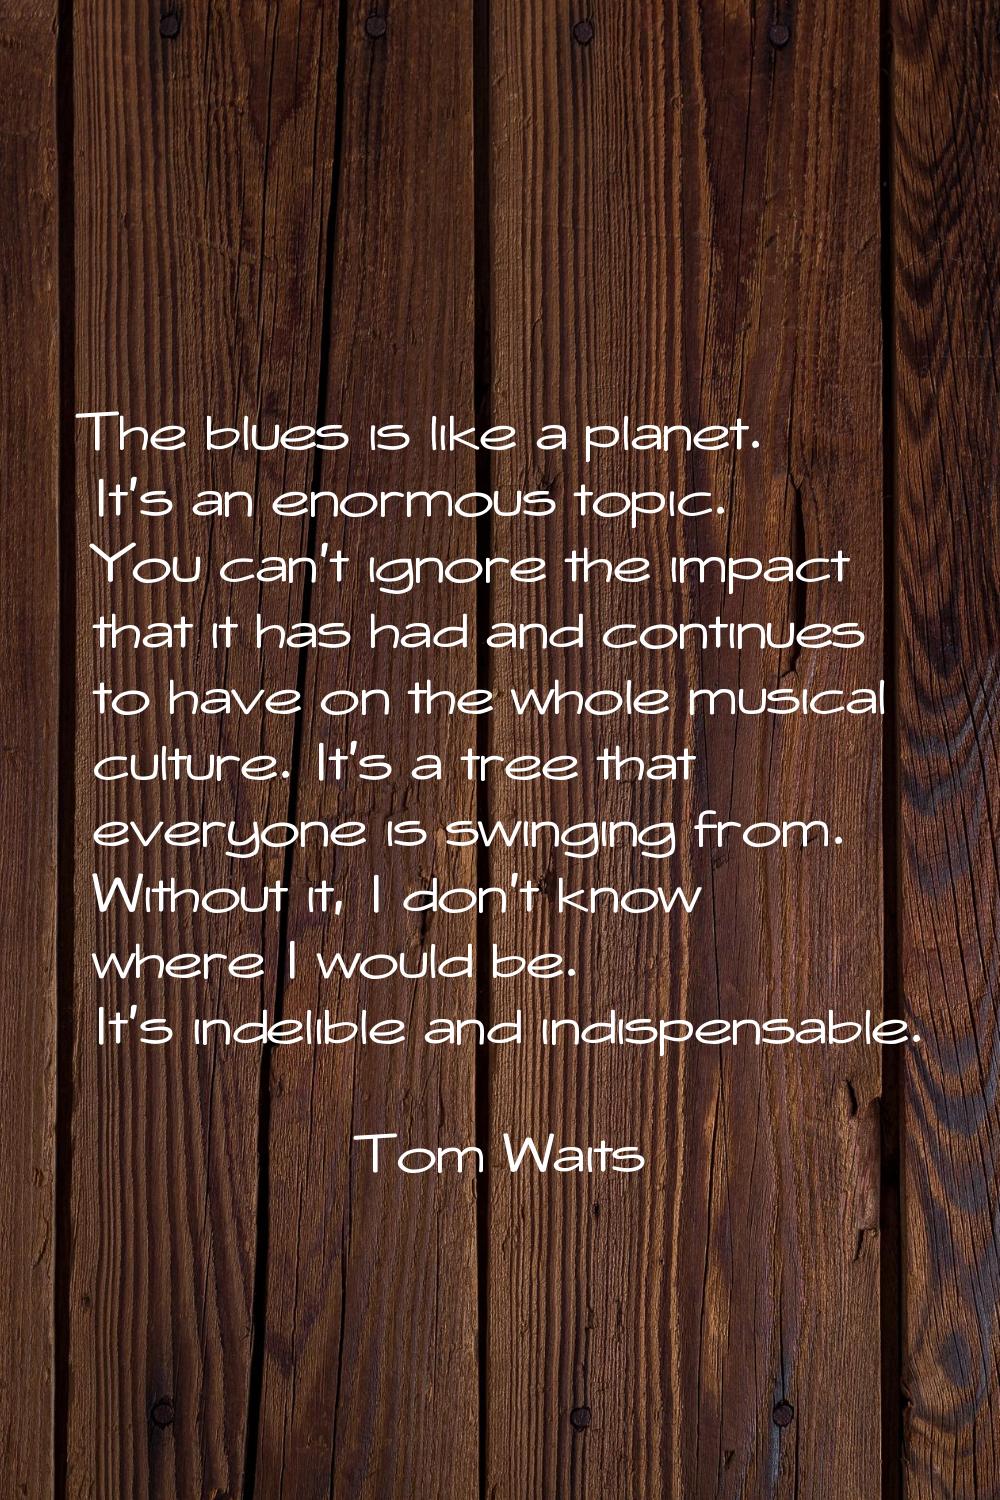 The blues is like a planet. It's an enormous topic. You can't ignore the impact that it has had and